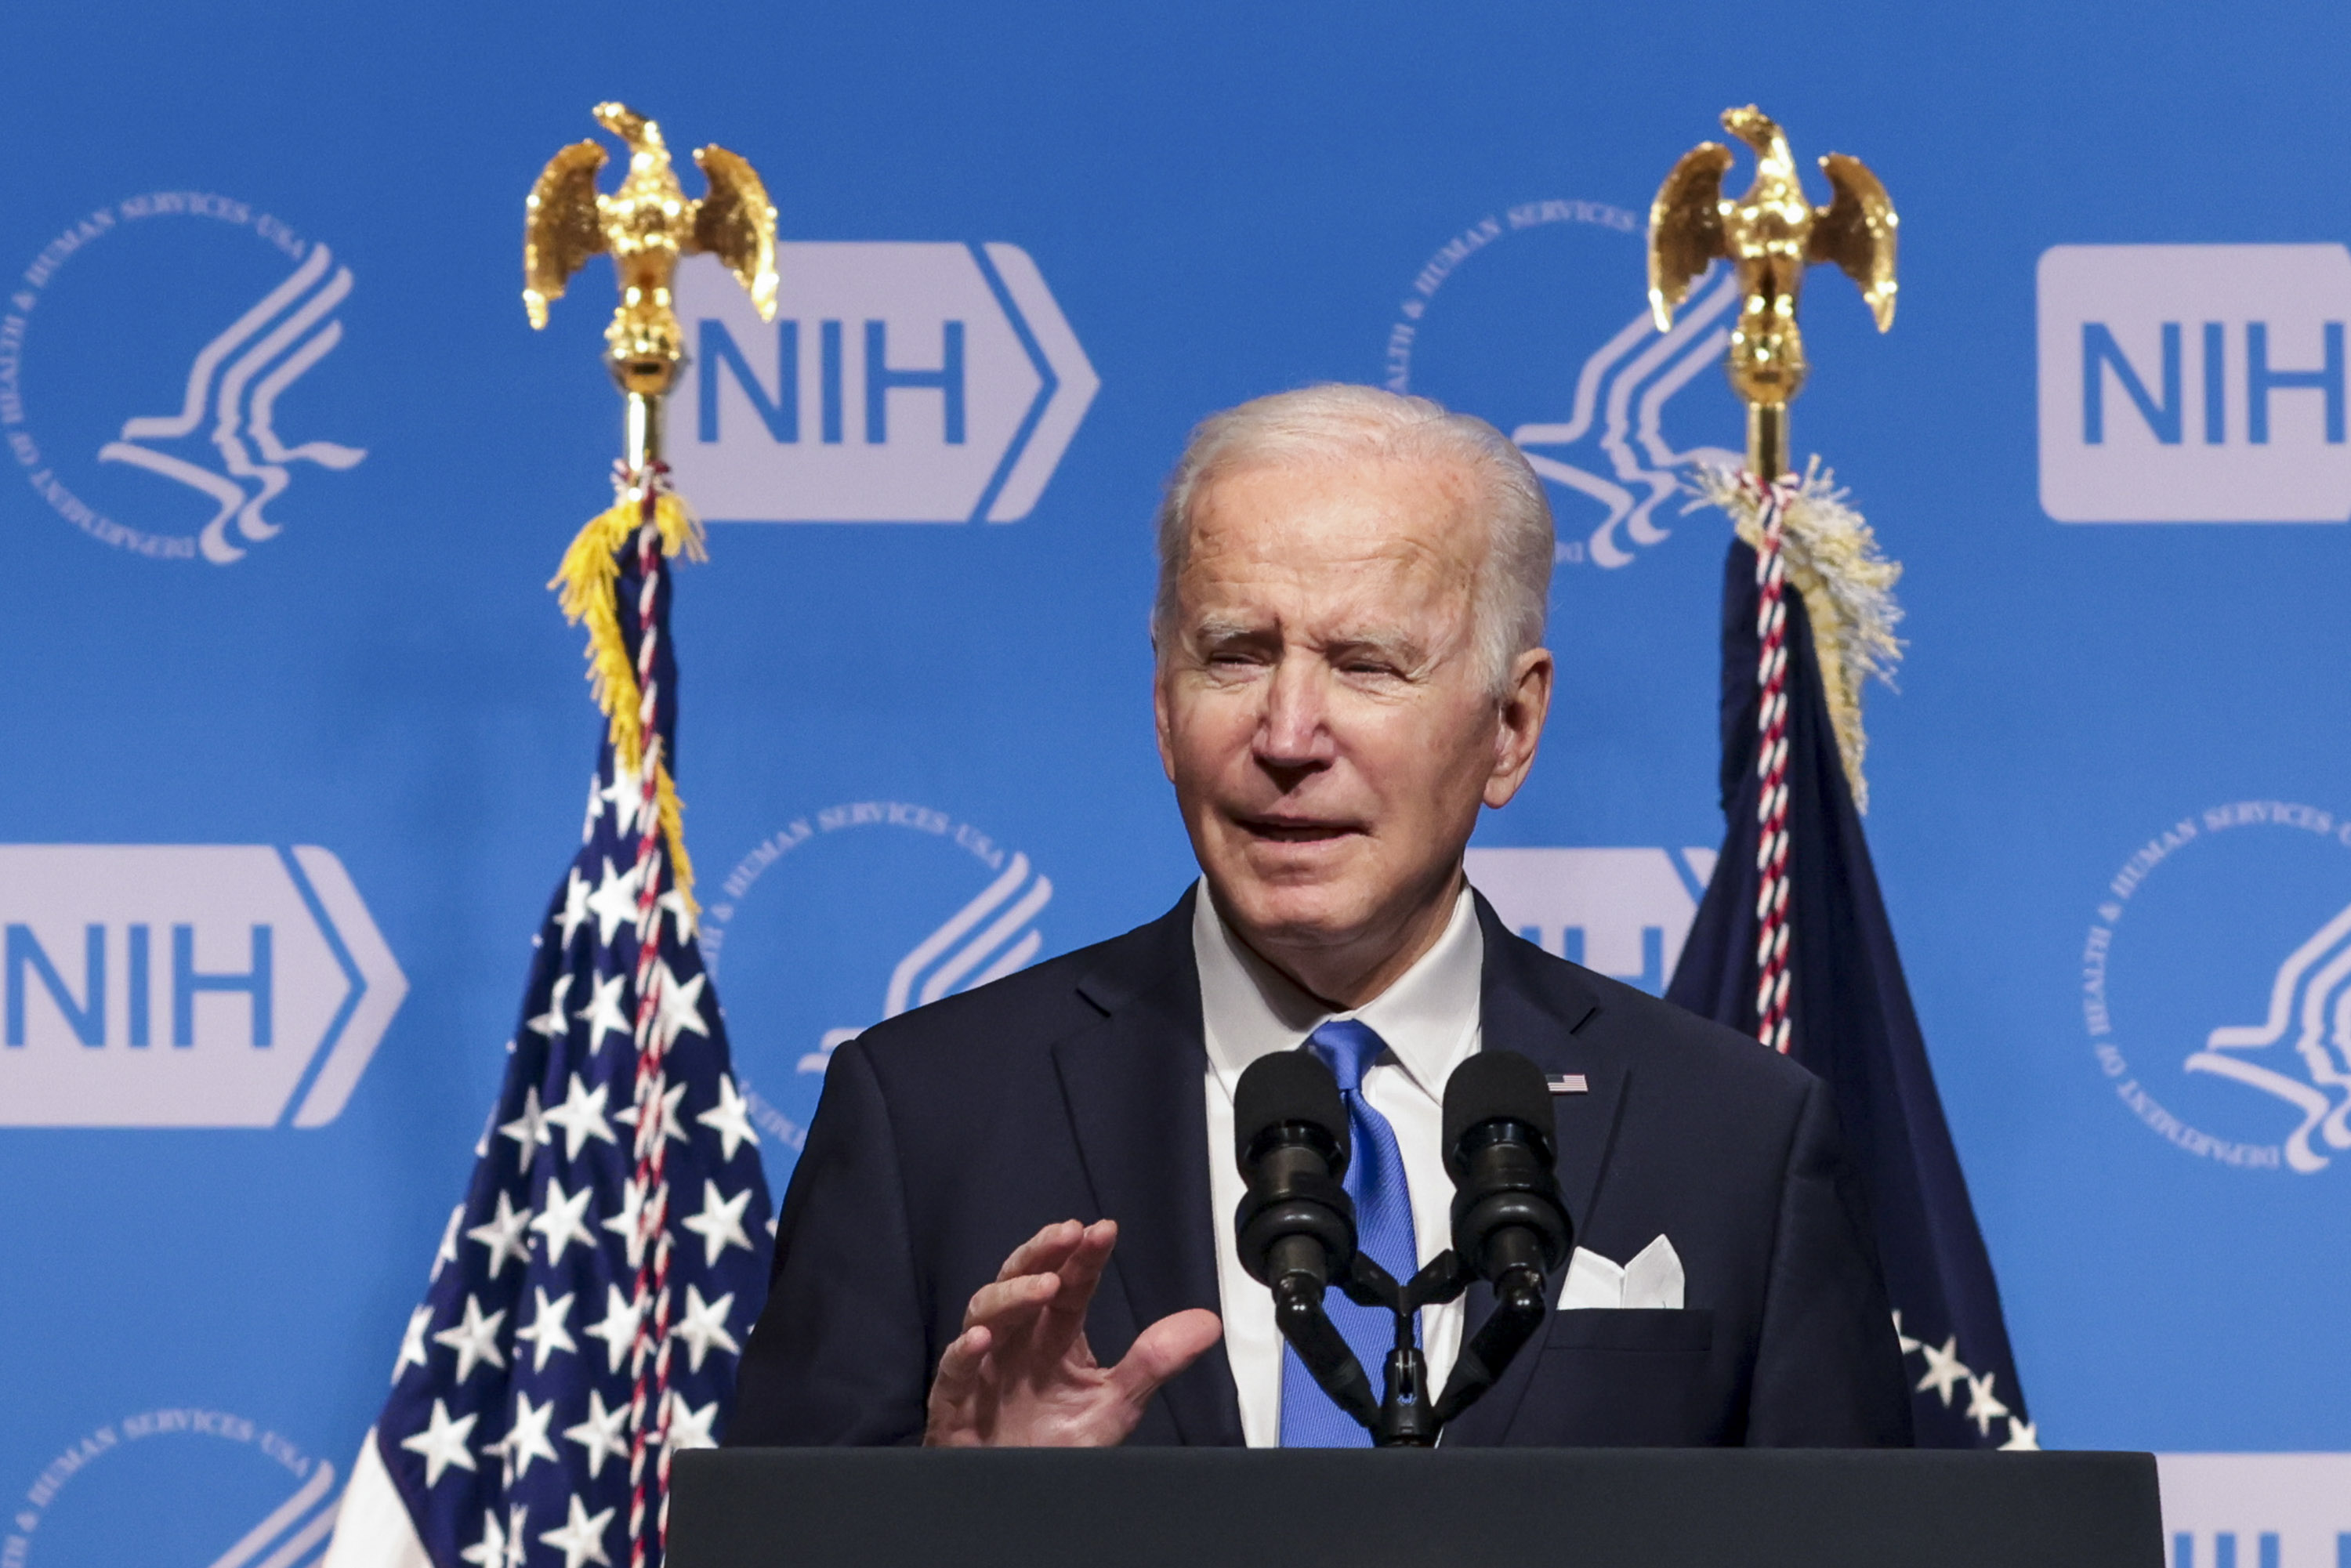 President Biden Visits National Institutes Of Health And Delivers Remarks On Fight Against Covid-19